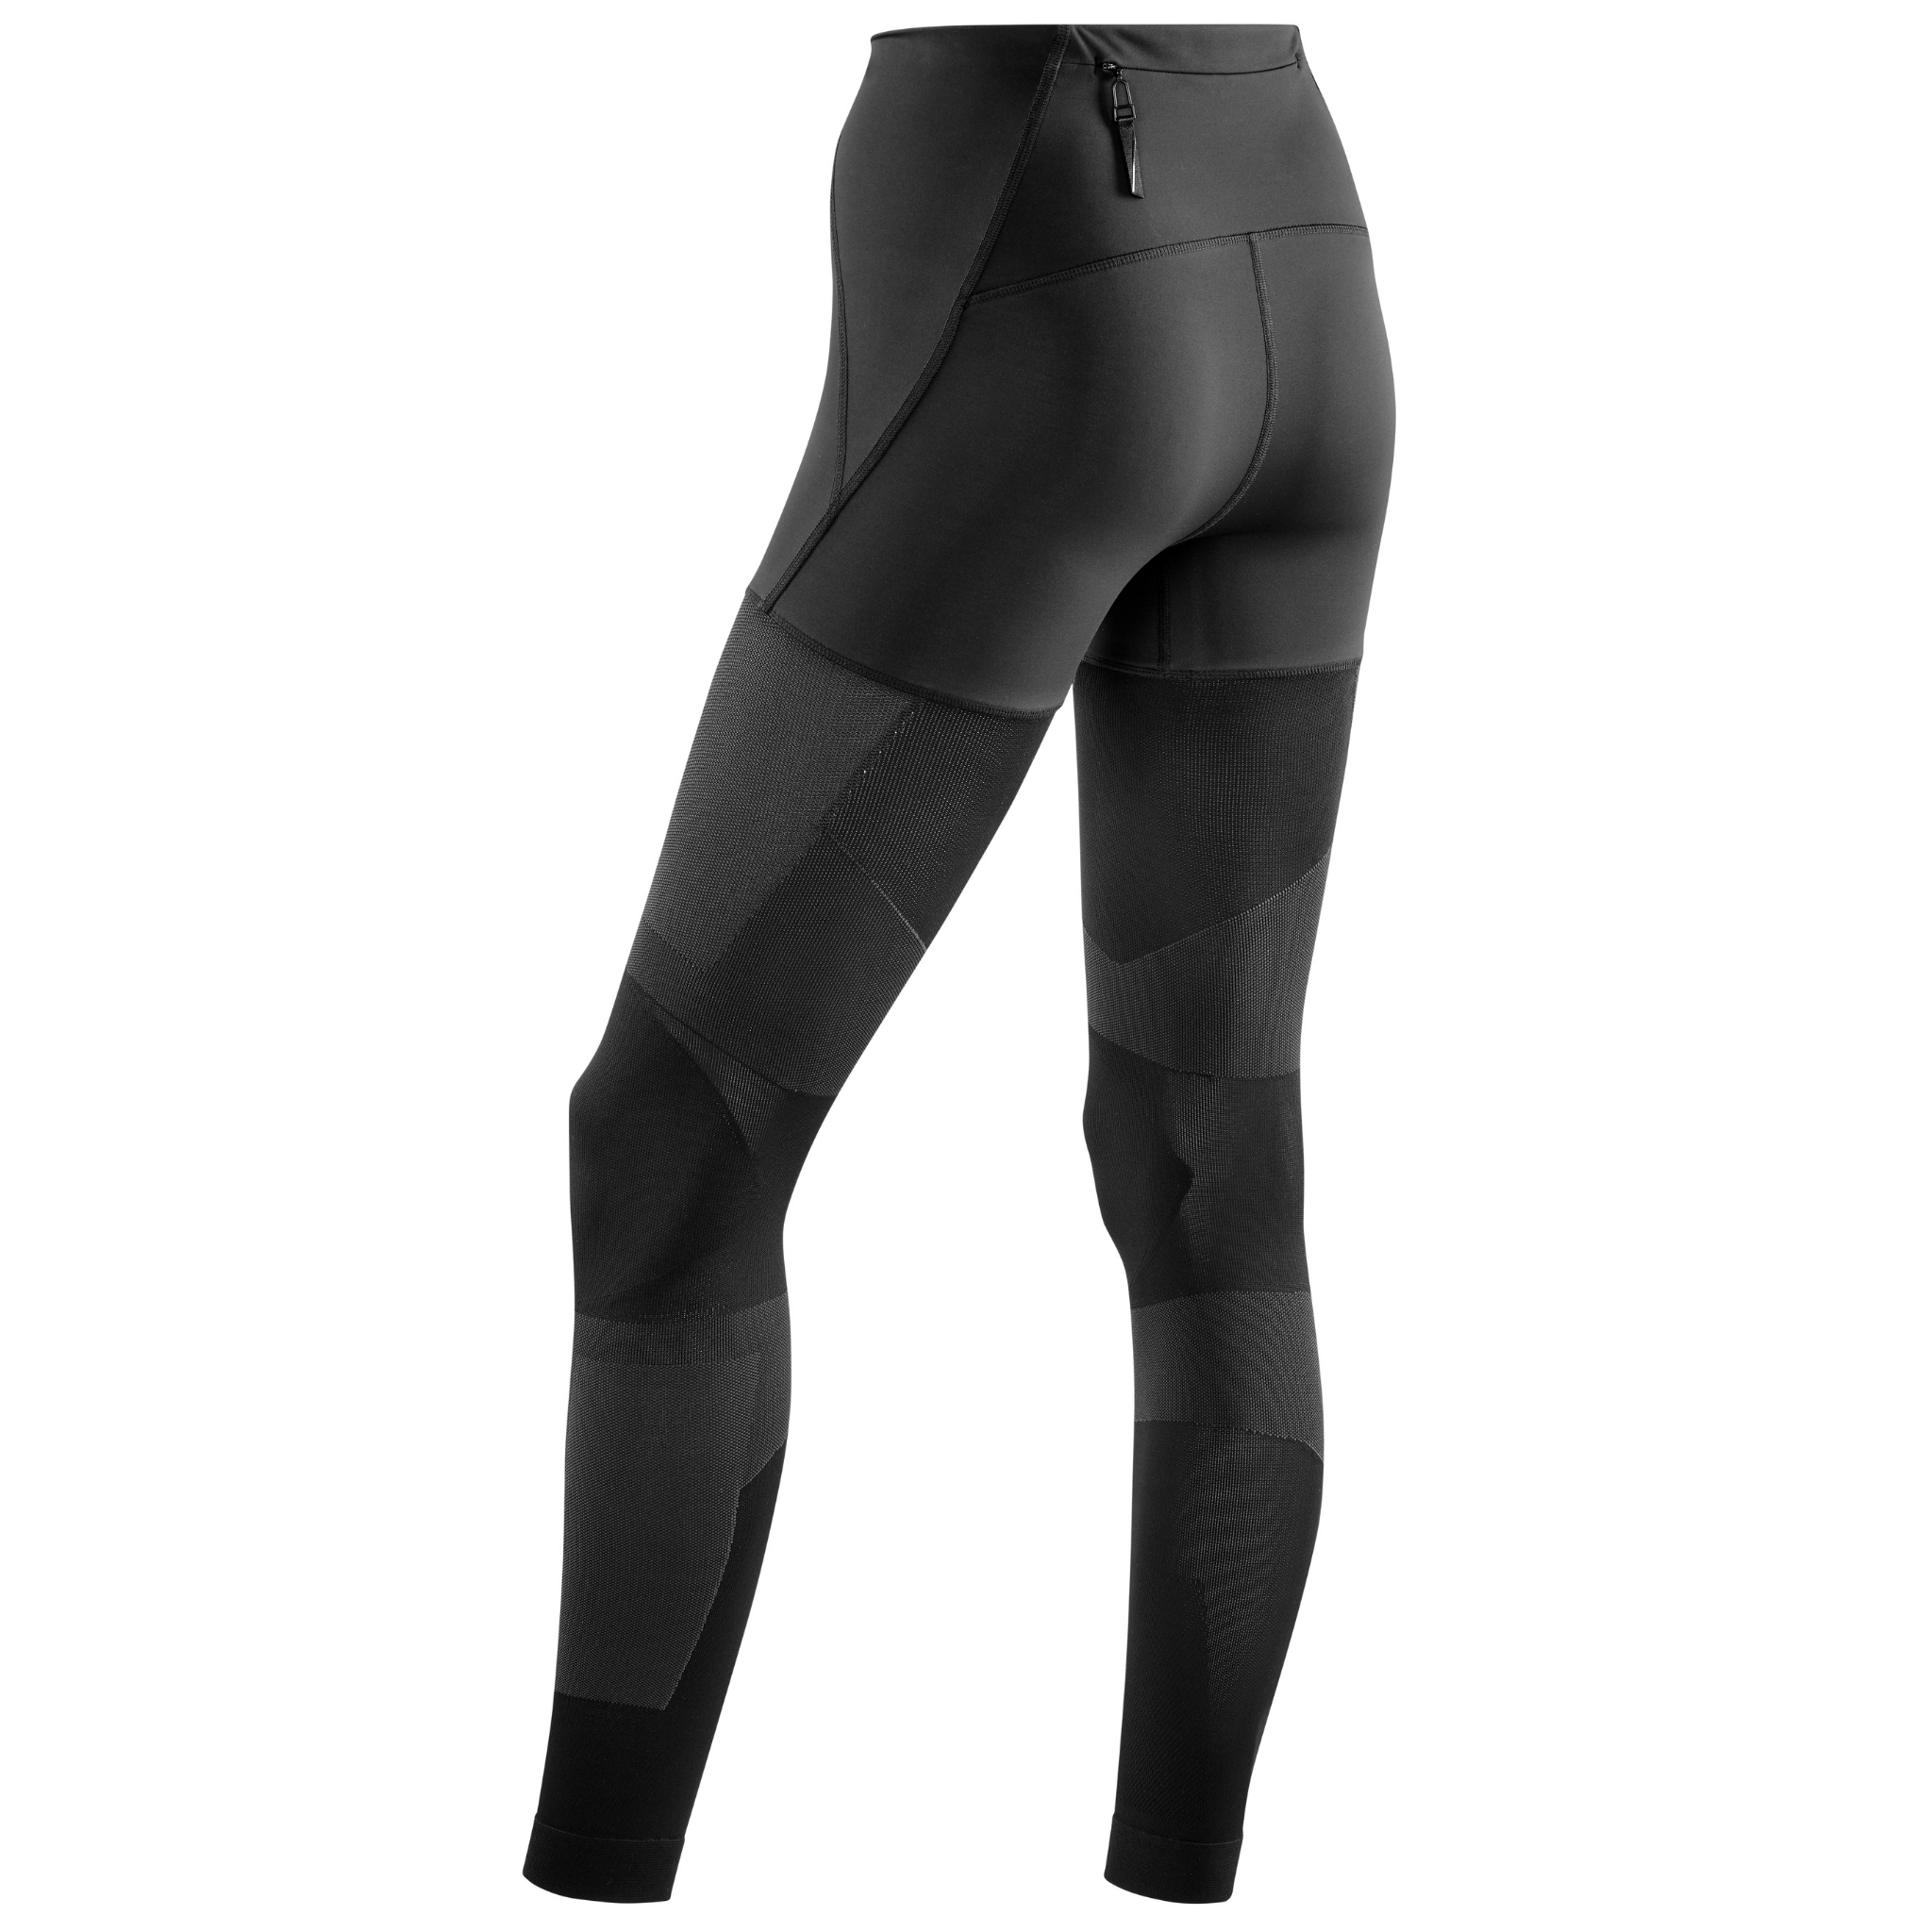 Best Compression Leggings That Perform in 2022 | The Core